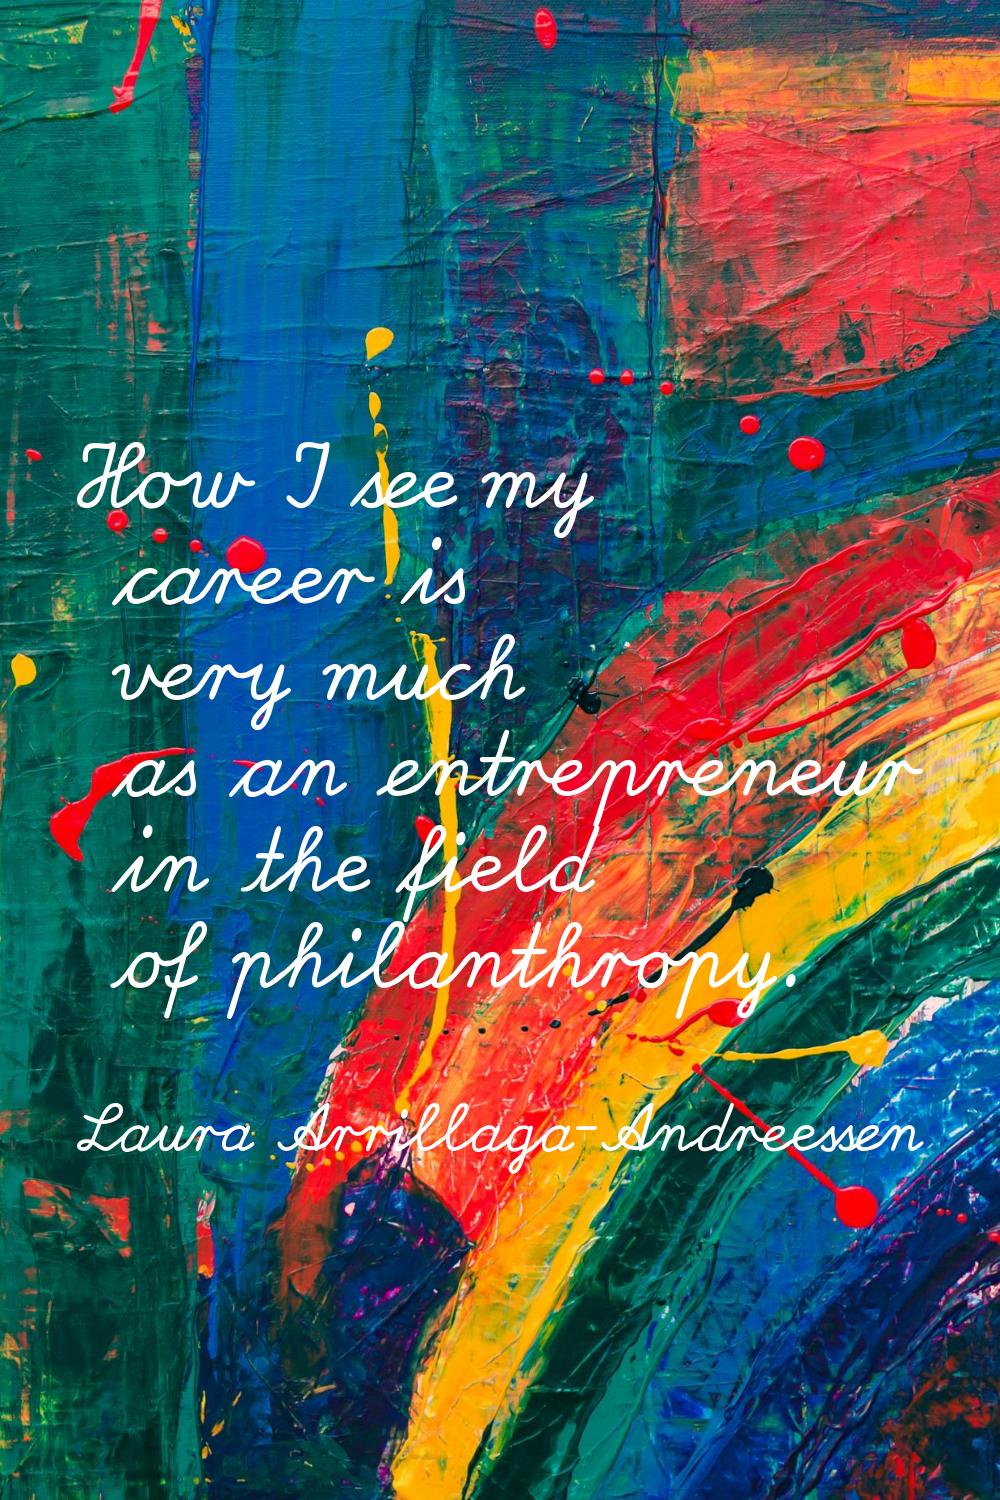 How I see my career is very much as an entrepreneur in the field of philanthropy.